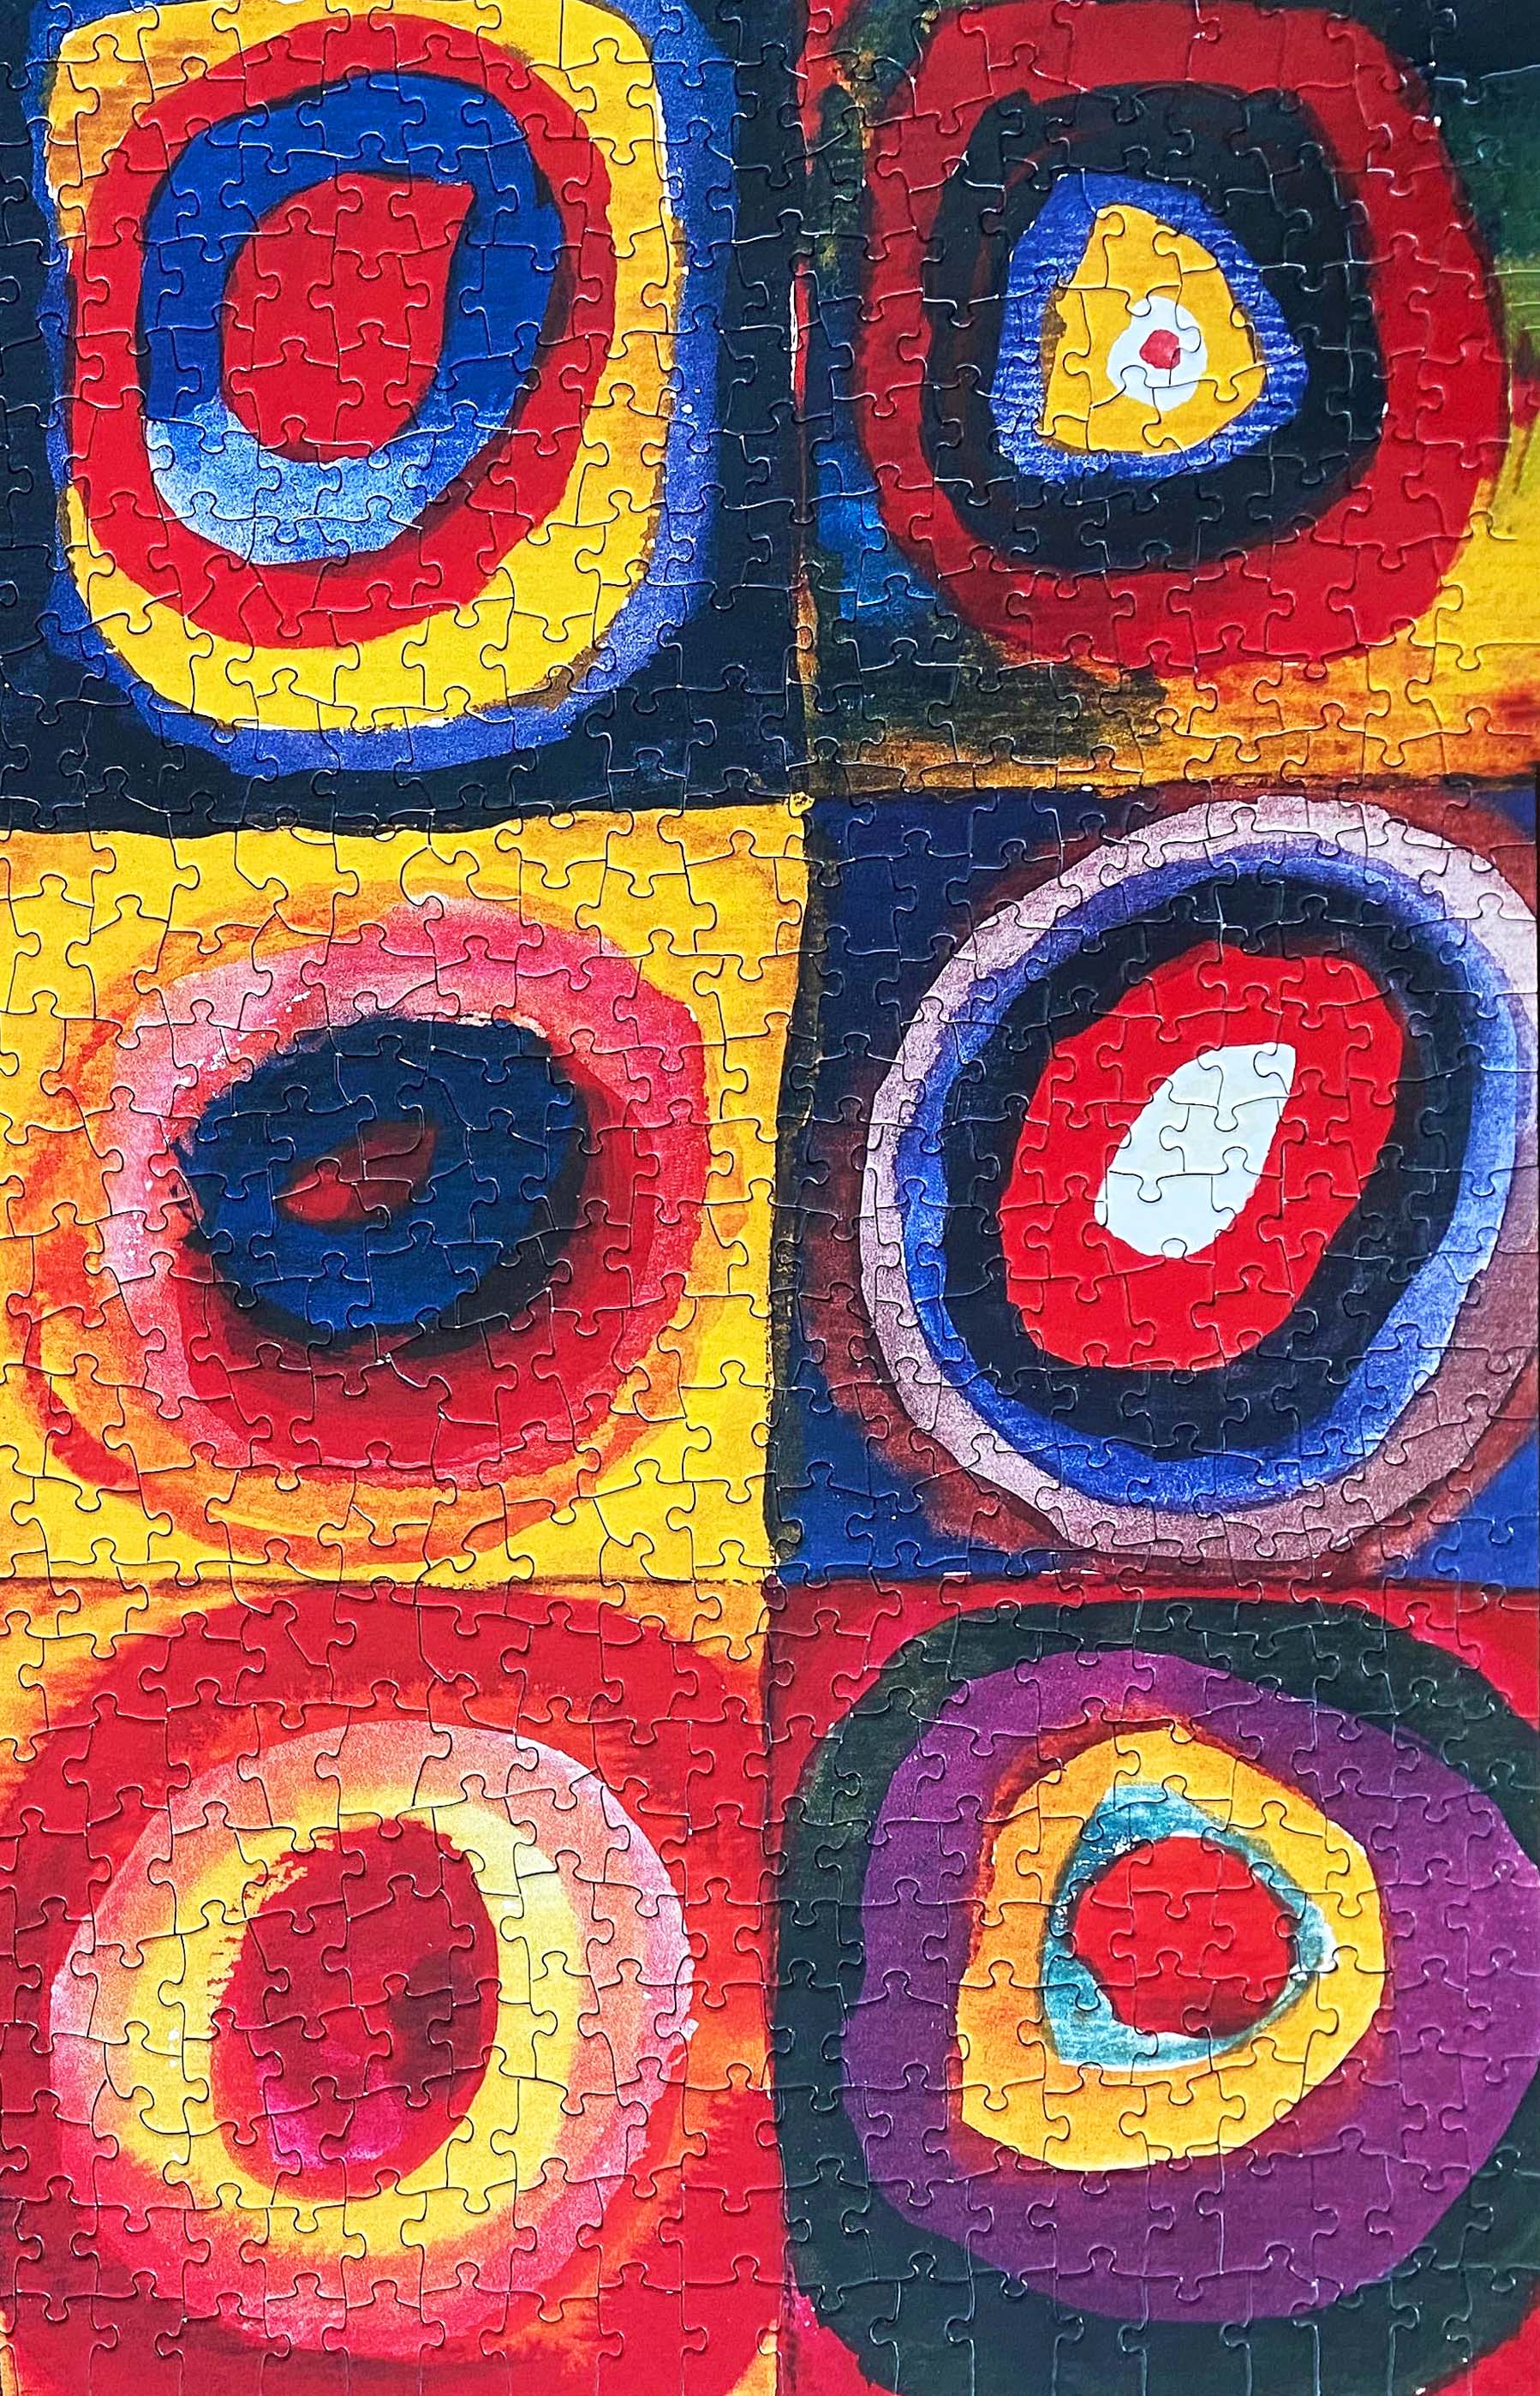 Discover the beauty of Wassily Kandinsky's Colour Study painting turned puzzle.